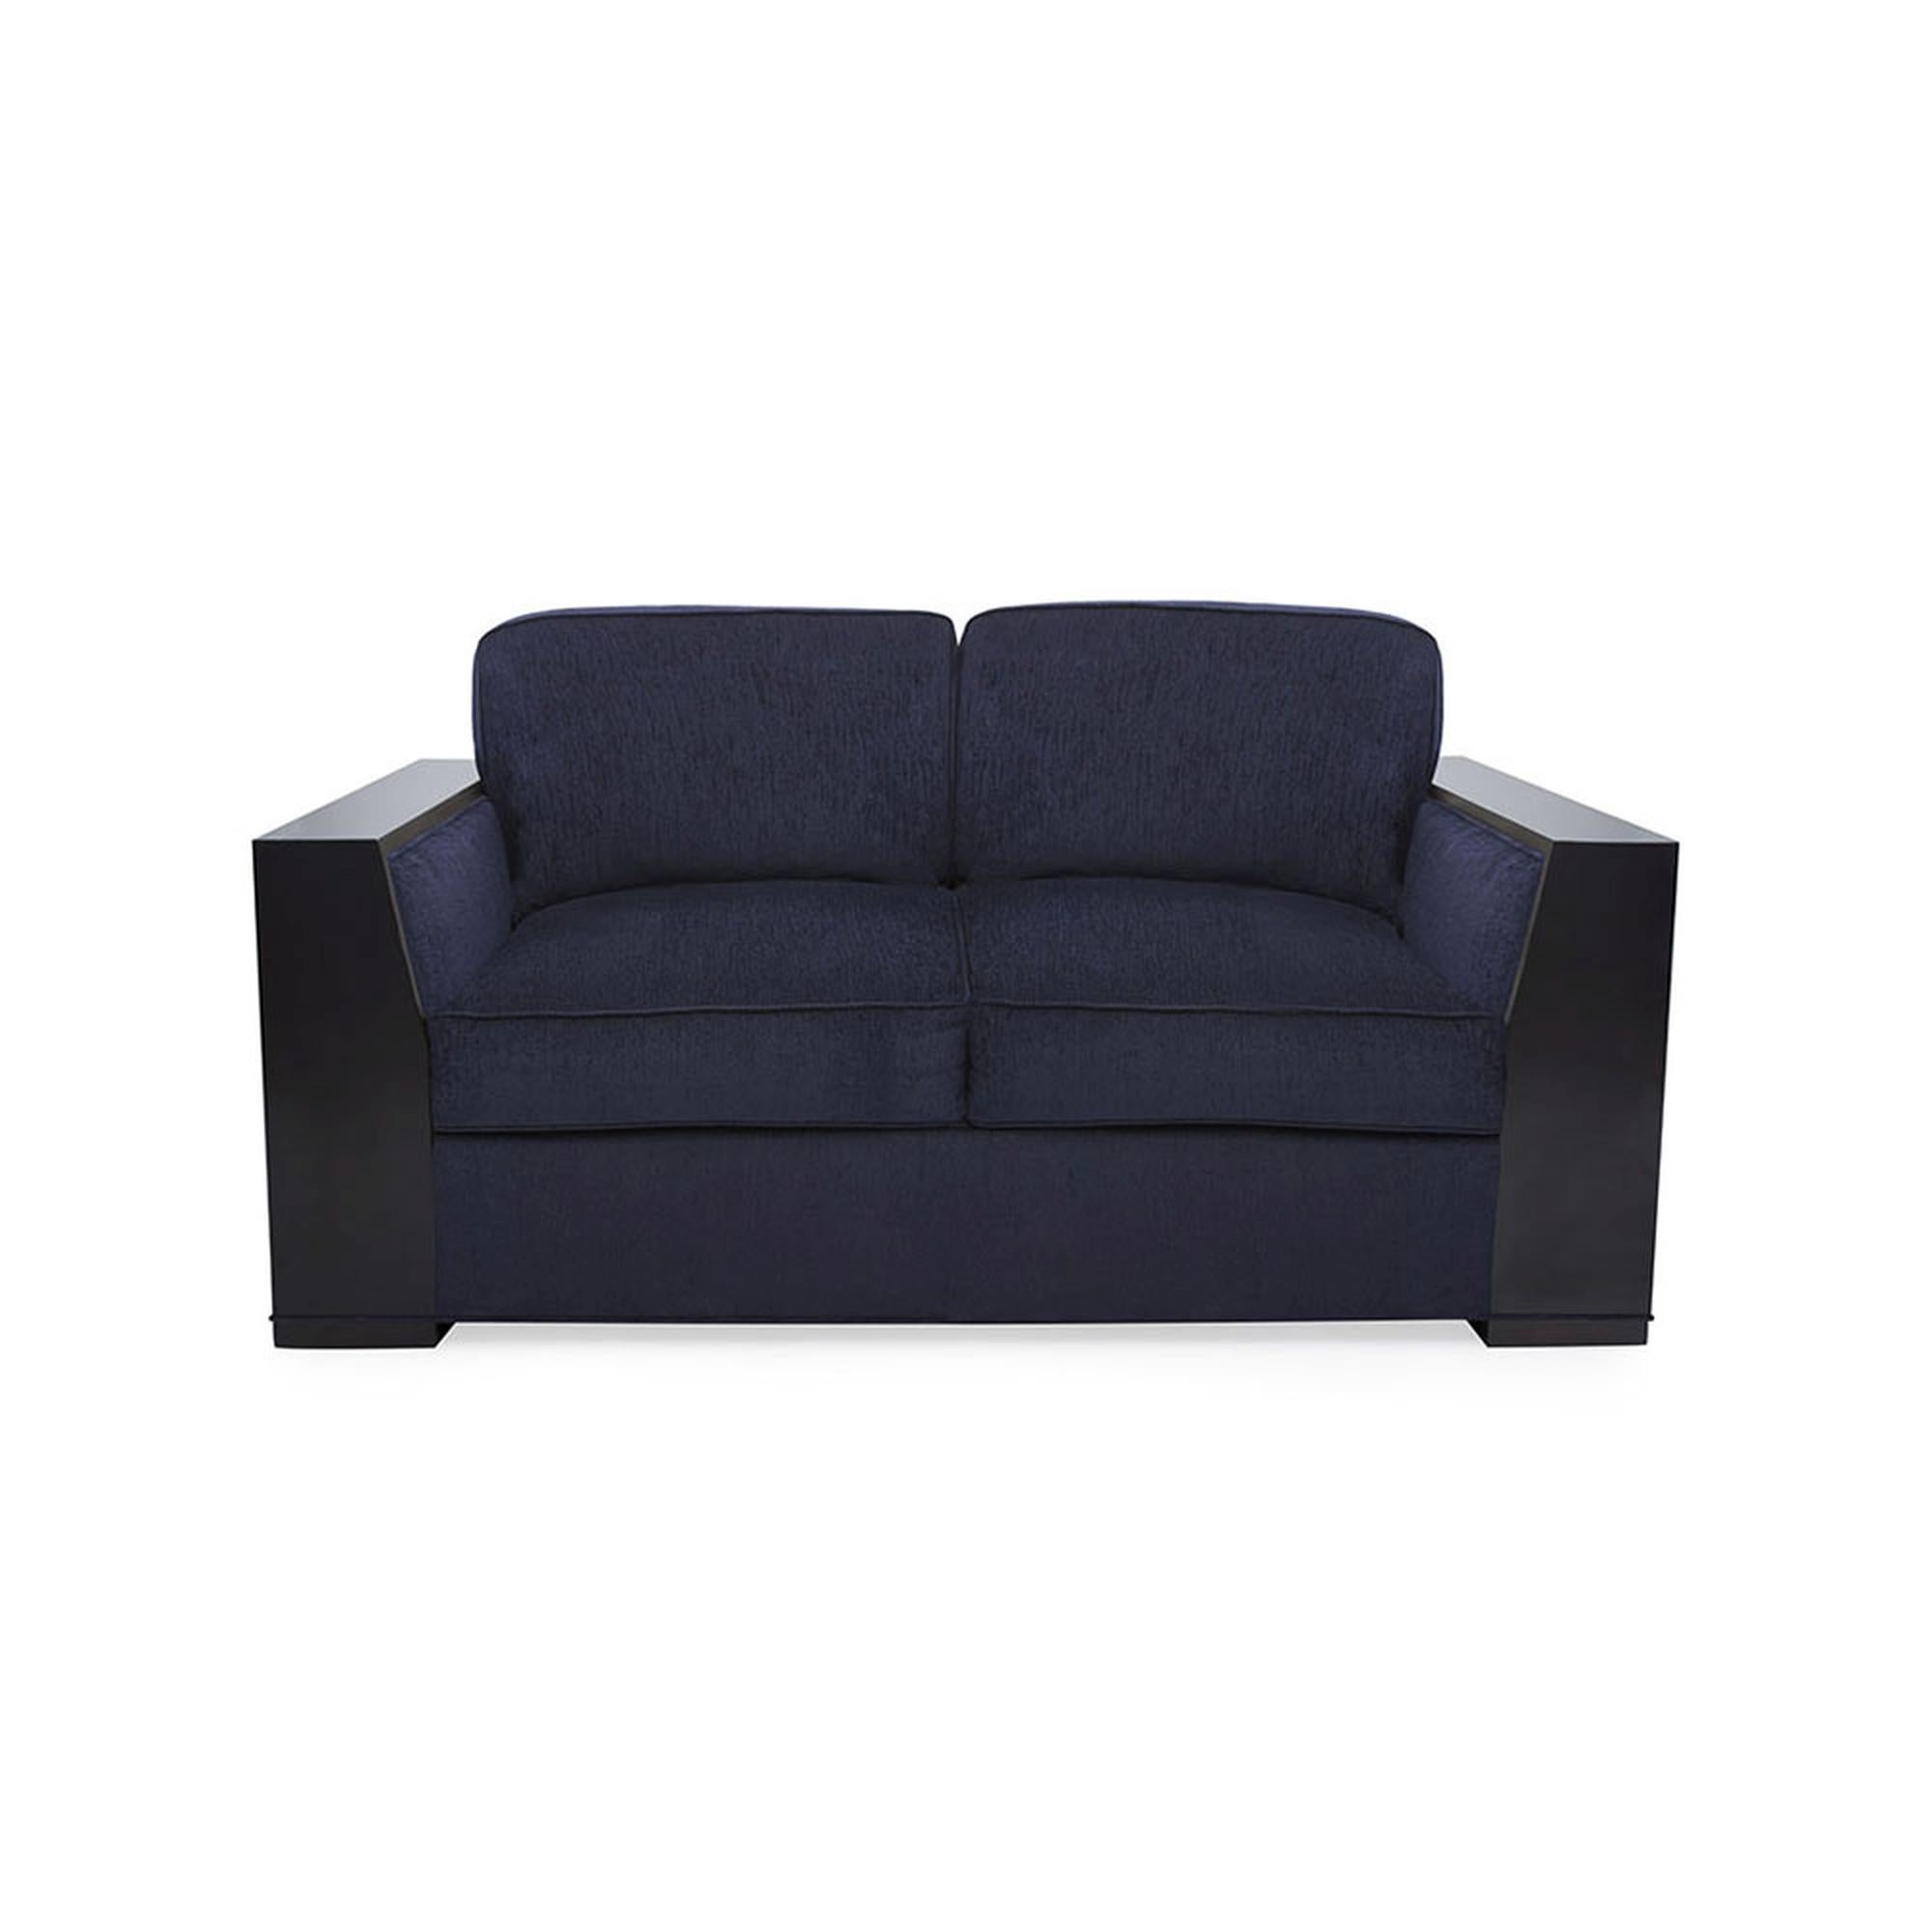 A rich and generous seat, the contemporary Bel Air Loveseat makes a solemn and substantial contribution to any room in which it sits. With a sleek wood frame, this chair is fully upholstered on all sides, and is luxuriously deep. The down wrapped